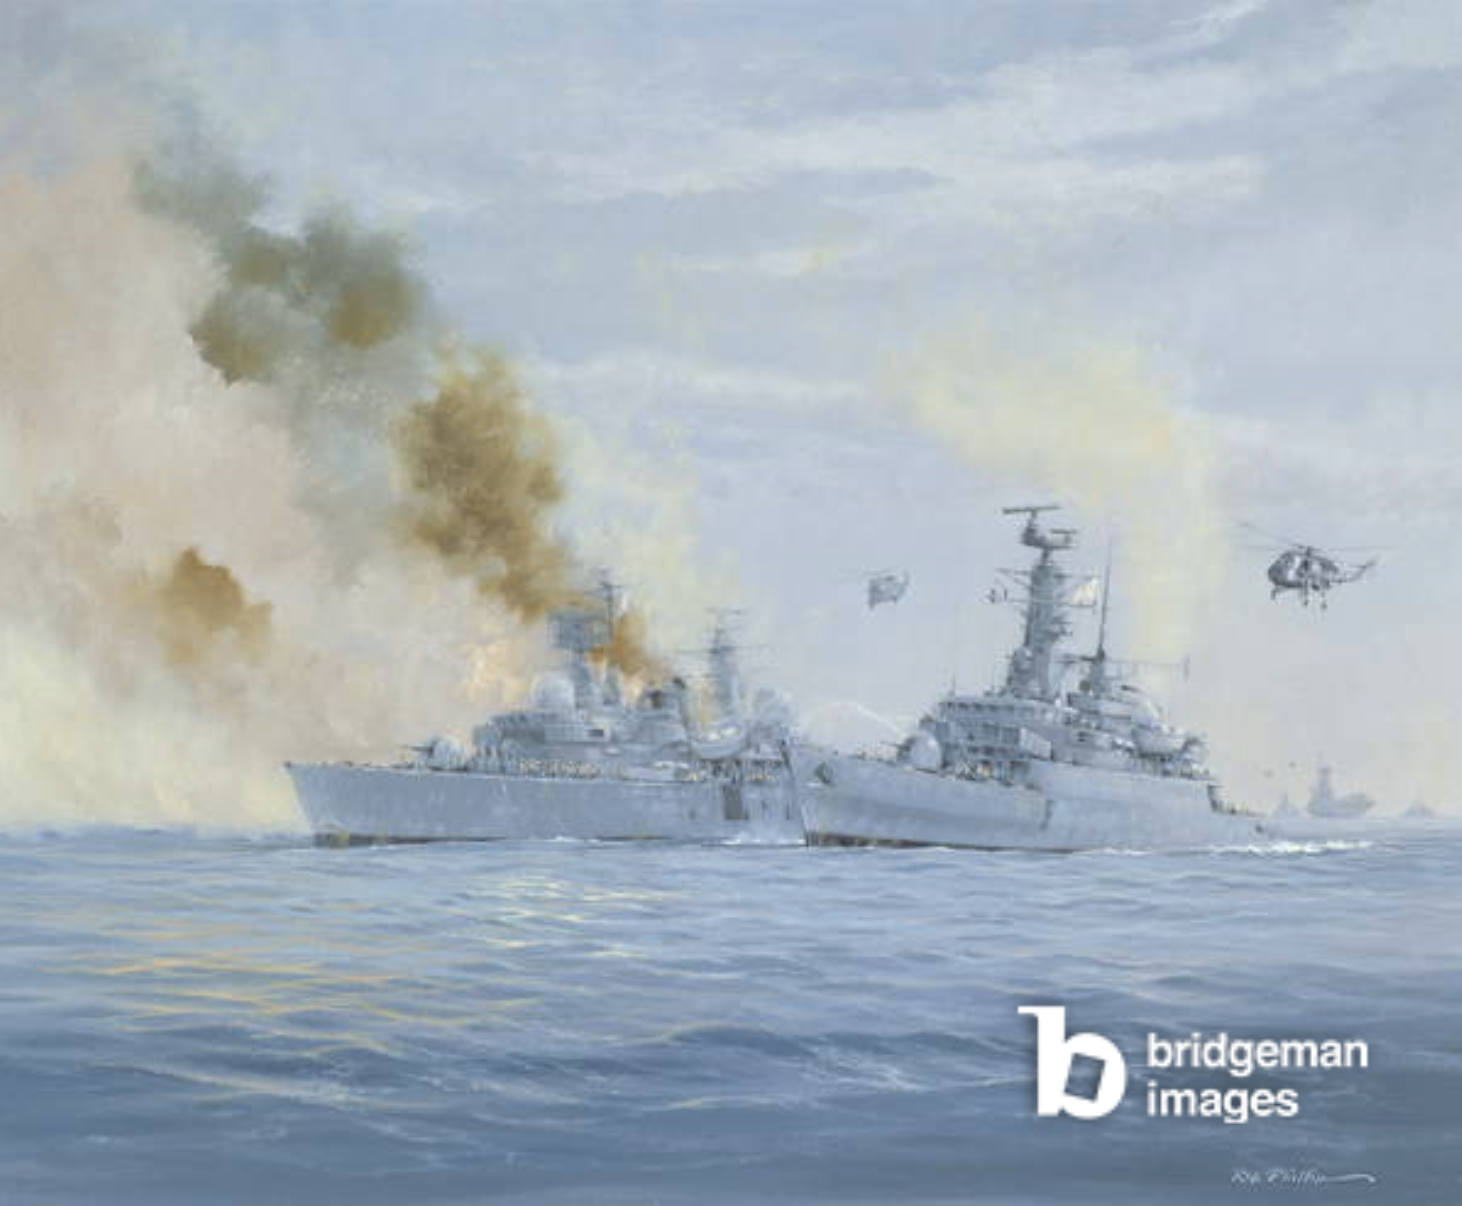 HMS Sheffield on fire, Falklands Islands Campaign (oil on canvas), English School, (20th century) / National Museum of the Royal Navy, Portsmouth, Hampshire, UK / © National Museum of the Royal Navy / Bridgeman Images